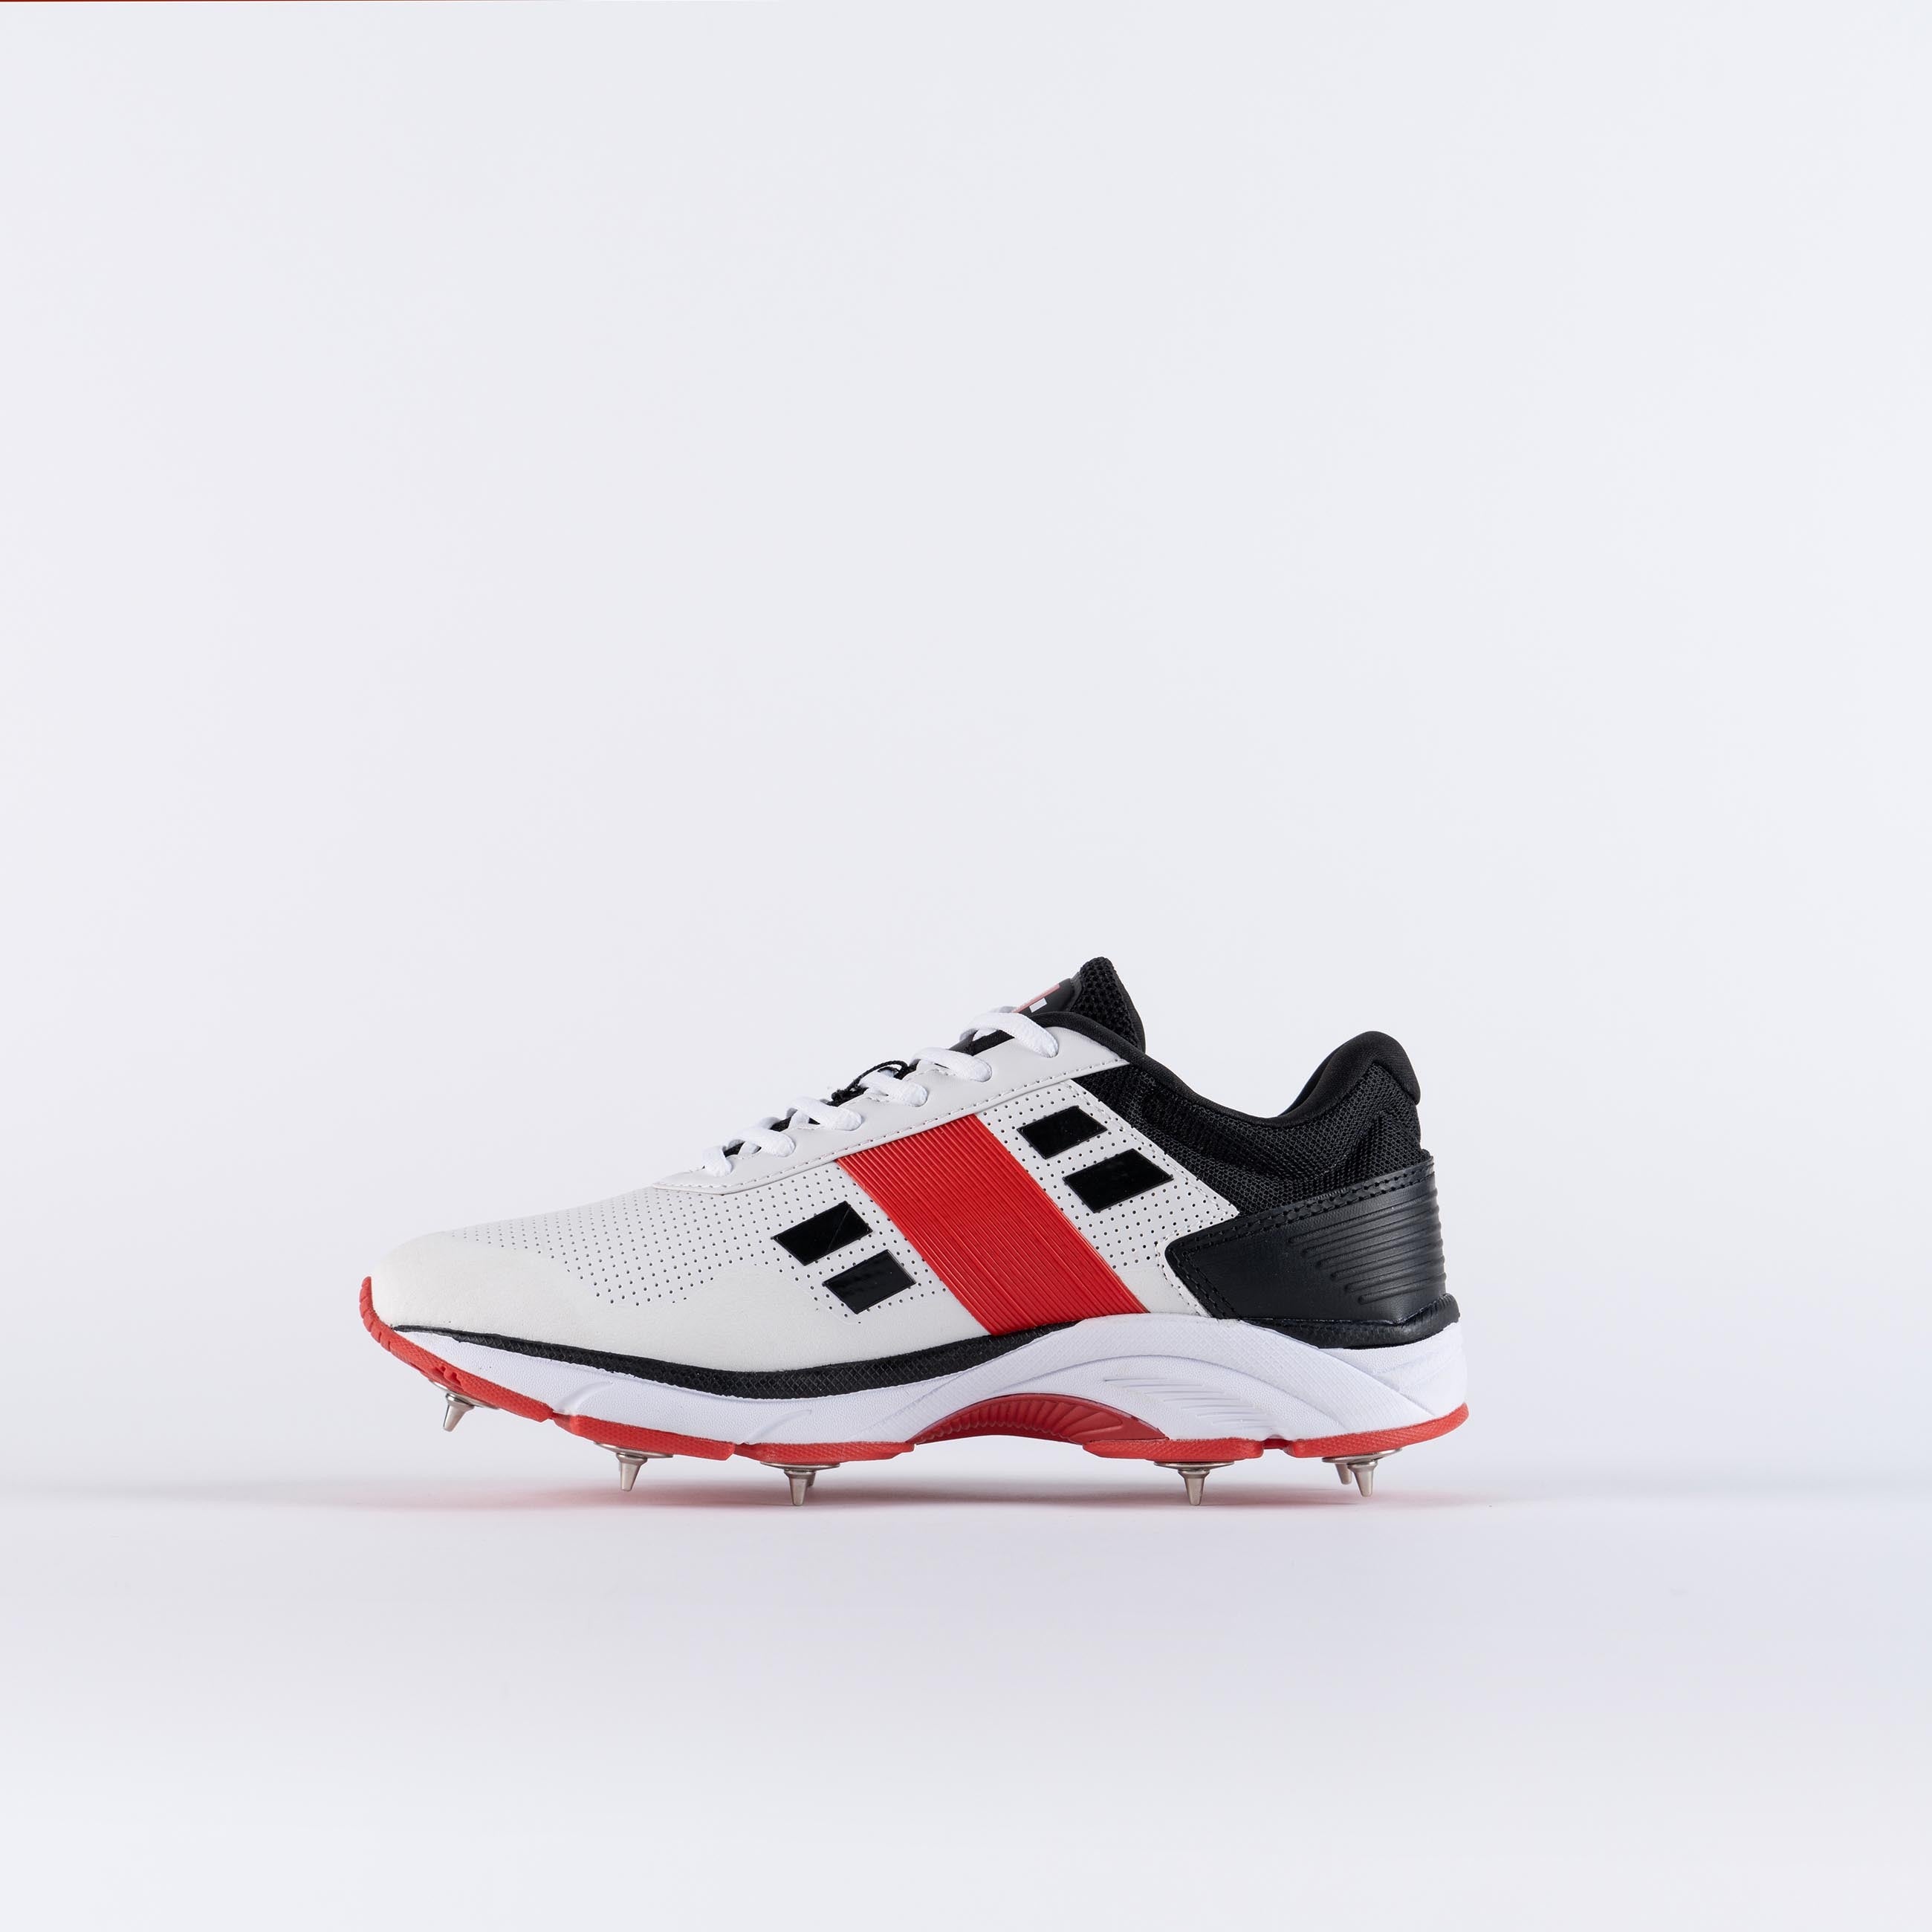 CSCA23Cricket Shoes Velocity 4.0 Spike Shoes, Instep